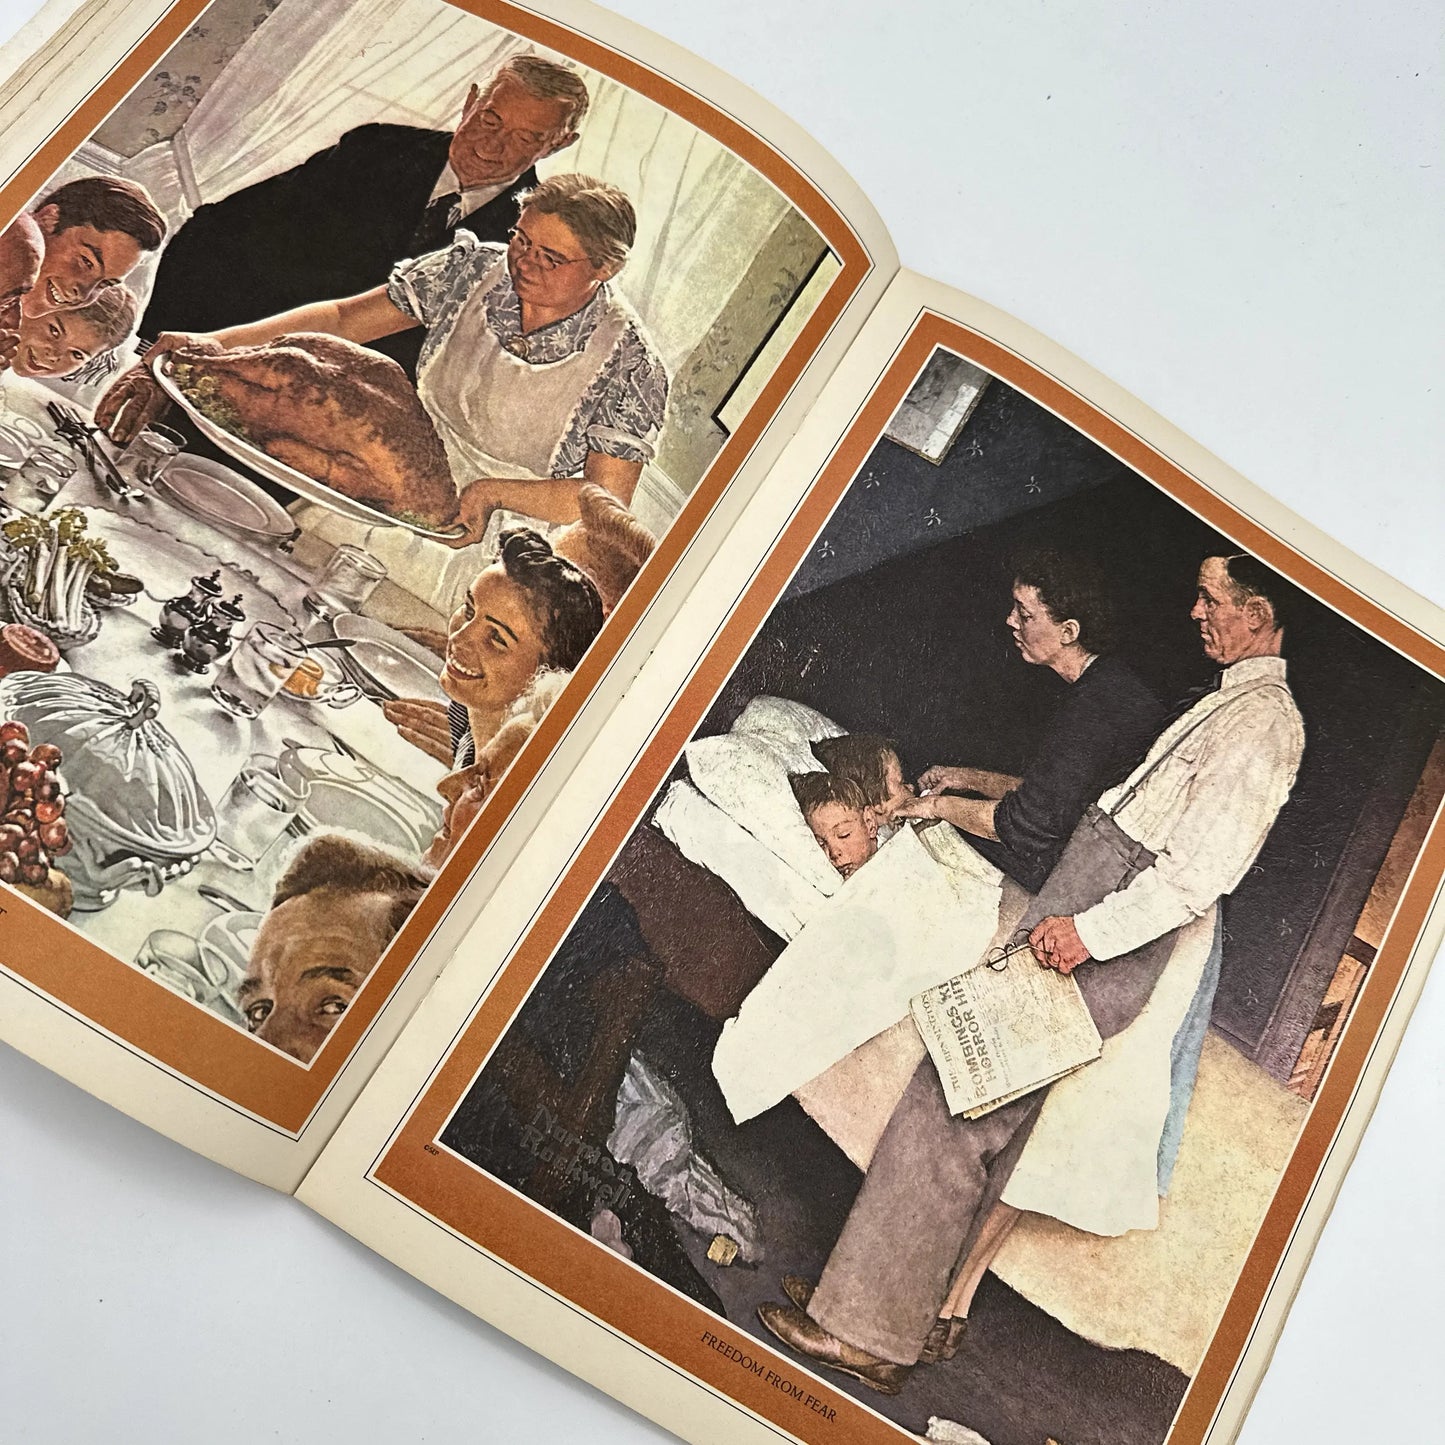 The Saturday Evening Post — Bicentennial edition - With historic articles and Rockwell's famous Four Freedoms